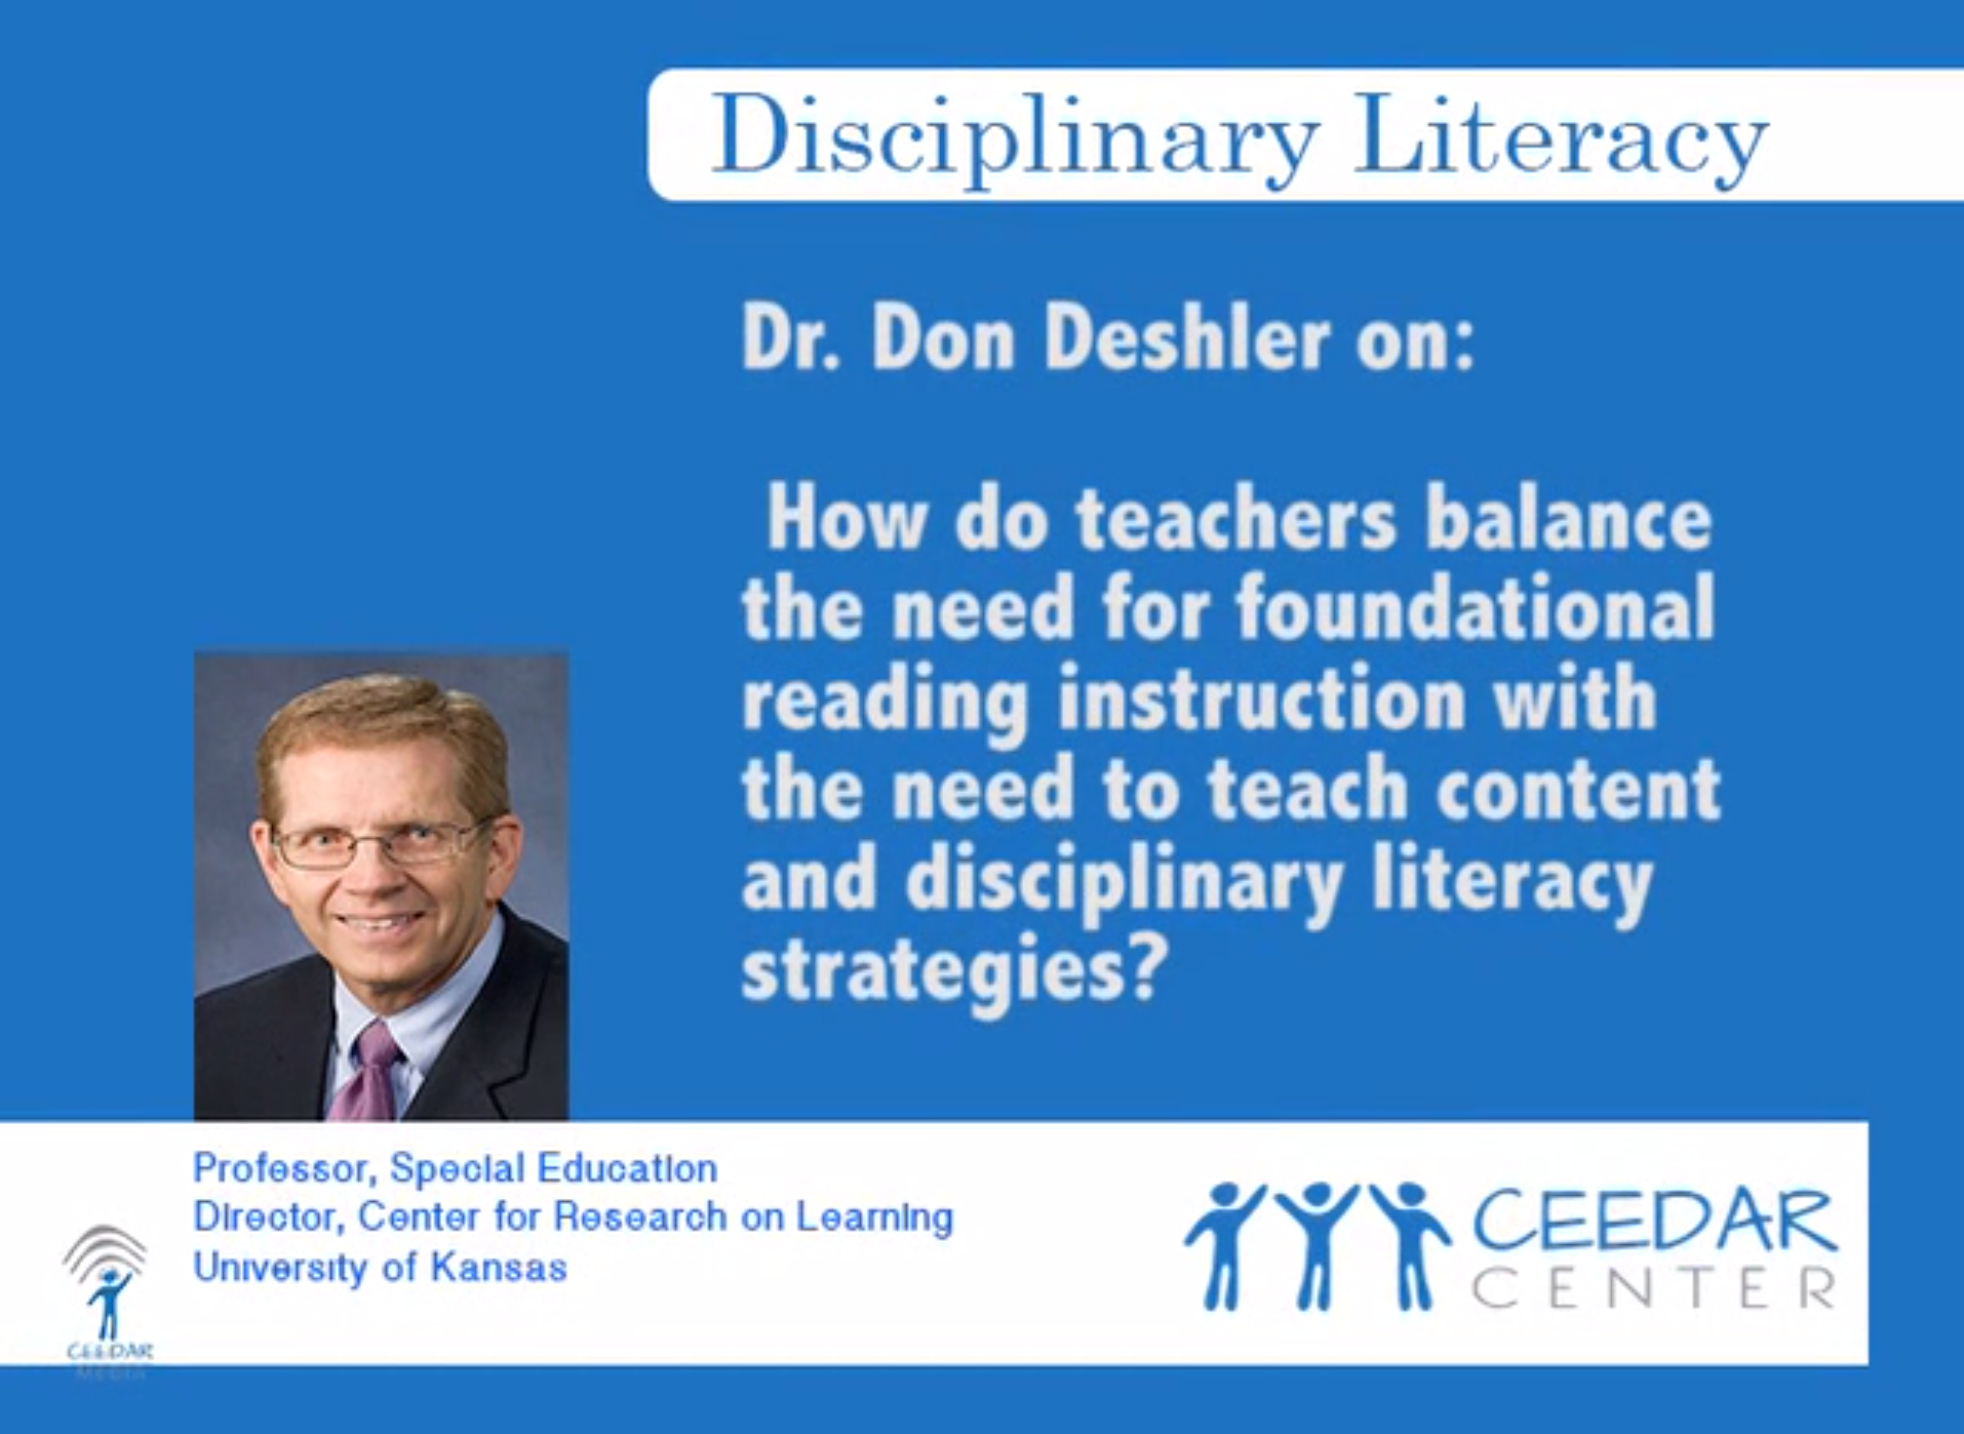 Dr. Don Deshler on content and disciplinary literacy strategies